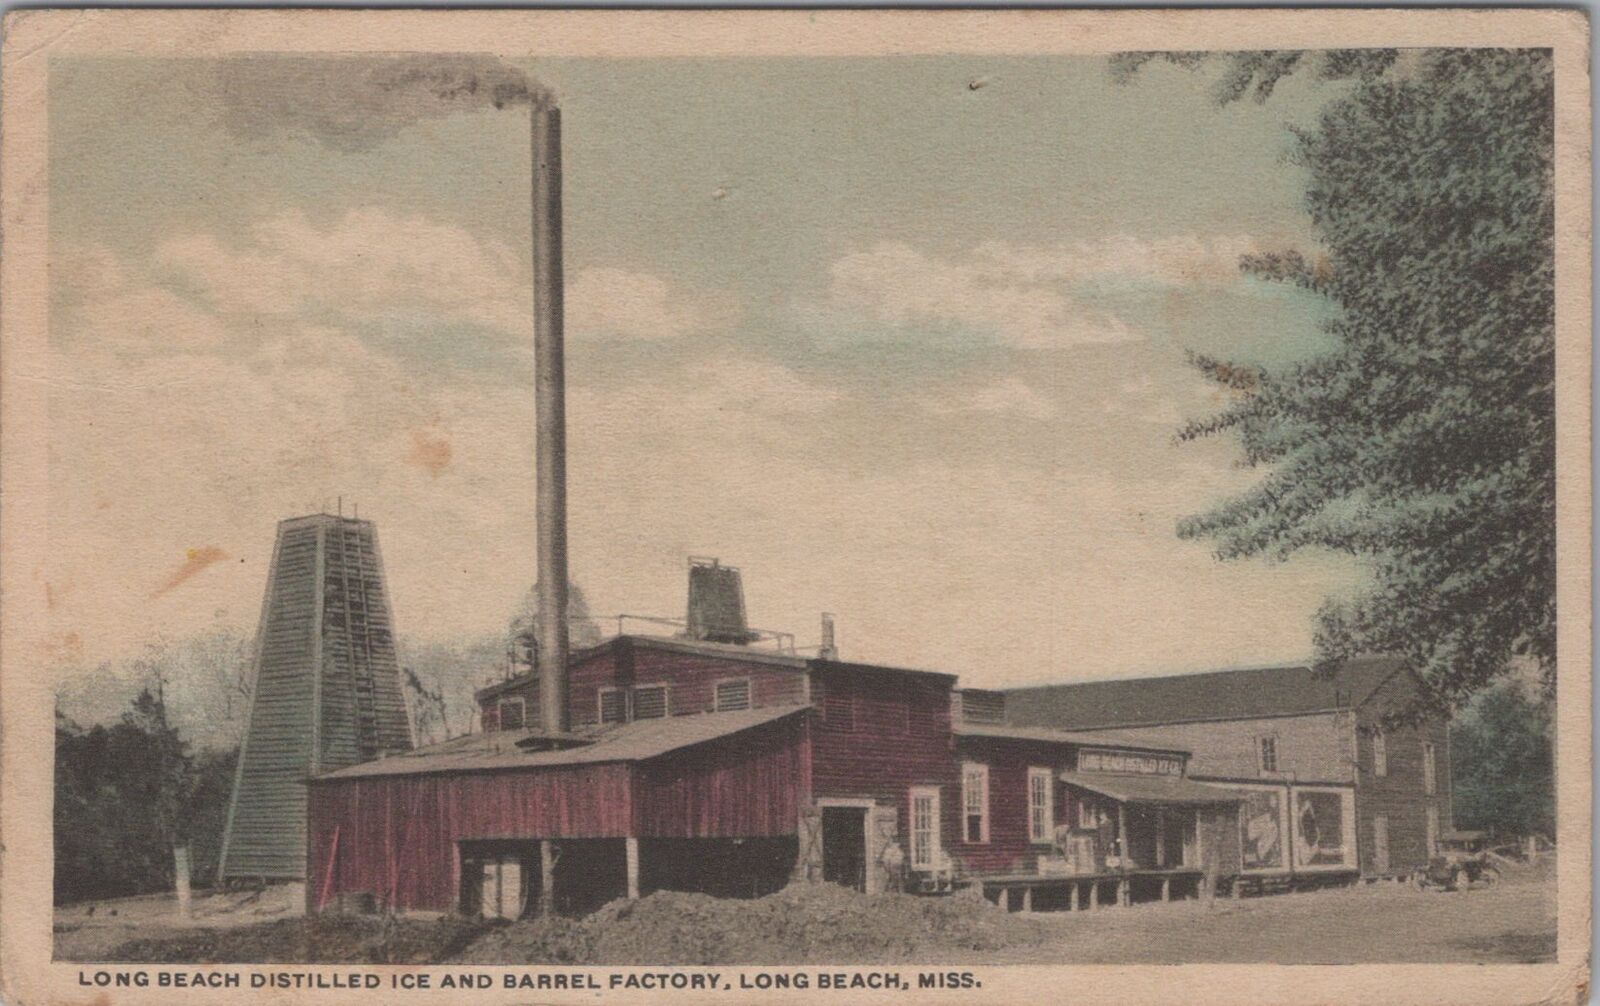 Long Beach Distilled Ice and Barrel Factory, Long Beach Mississippi Postcard